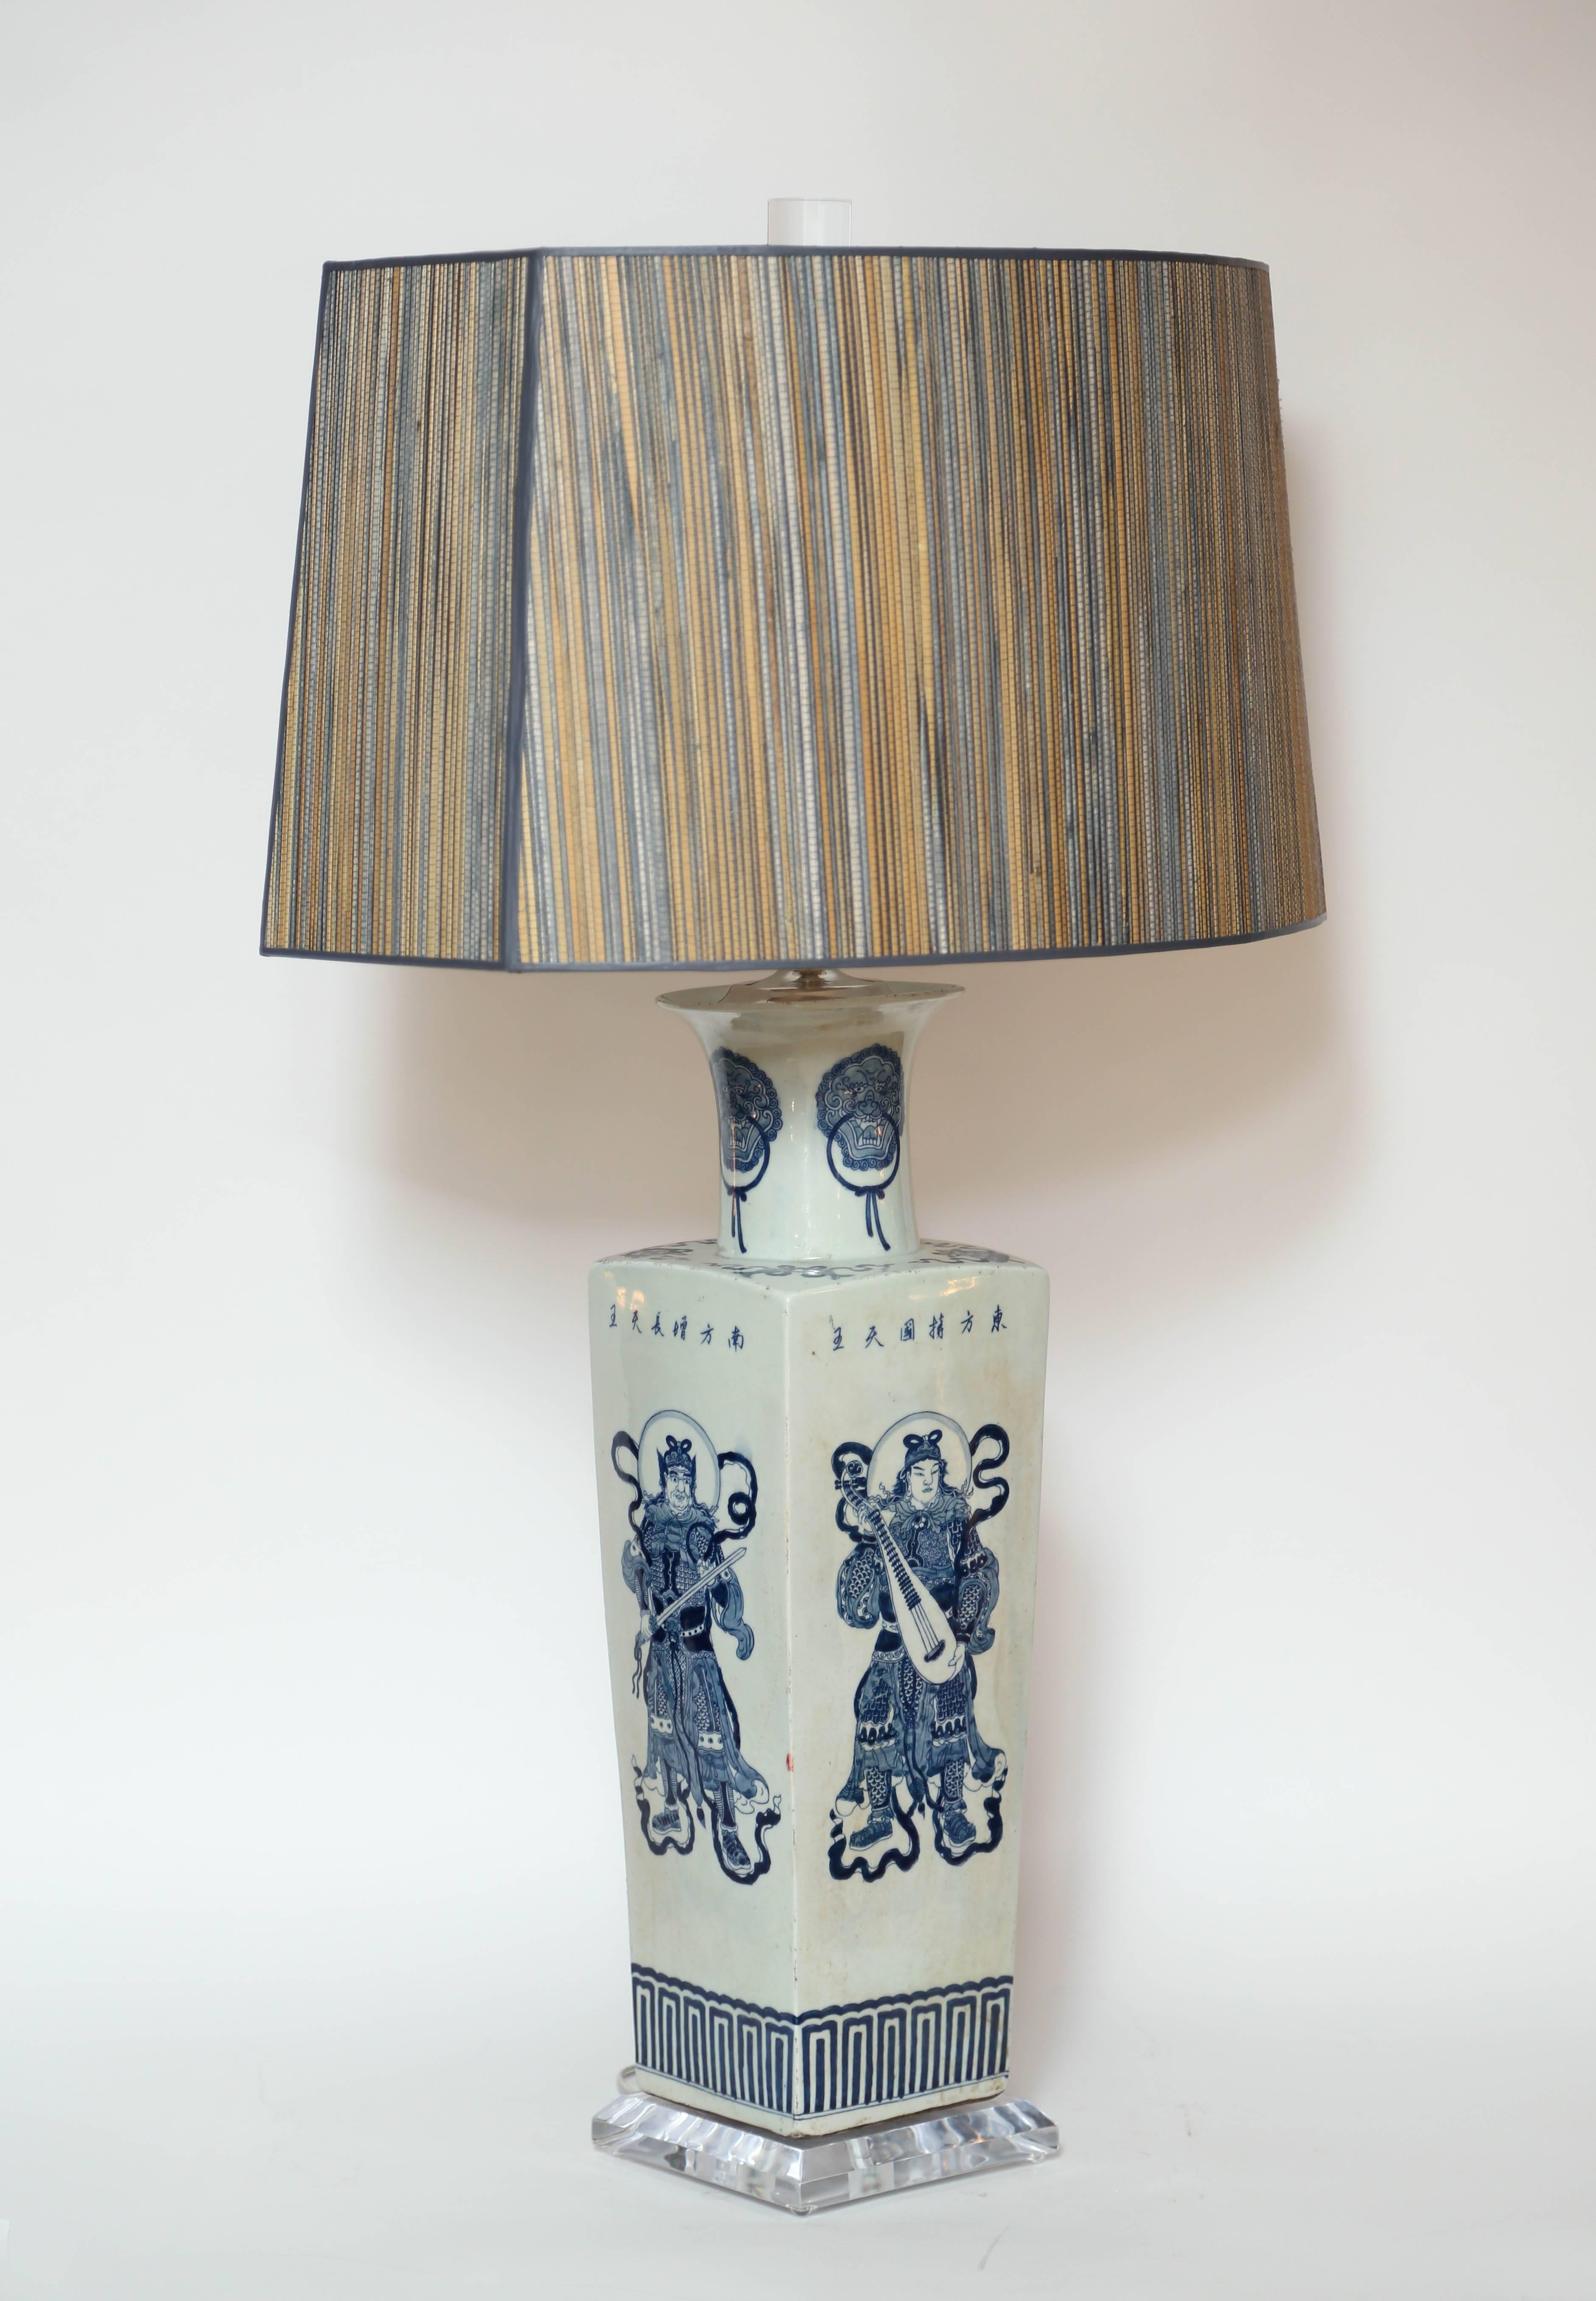 Warriors table lamps with shades
original blue and white table lamps of Chinese warriors on a Lucide base,
Finished in the finest polished nickel hardware. Complimented with custom 19